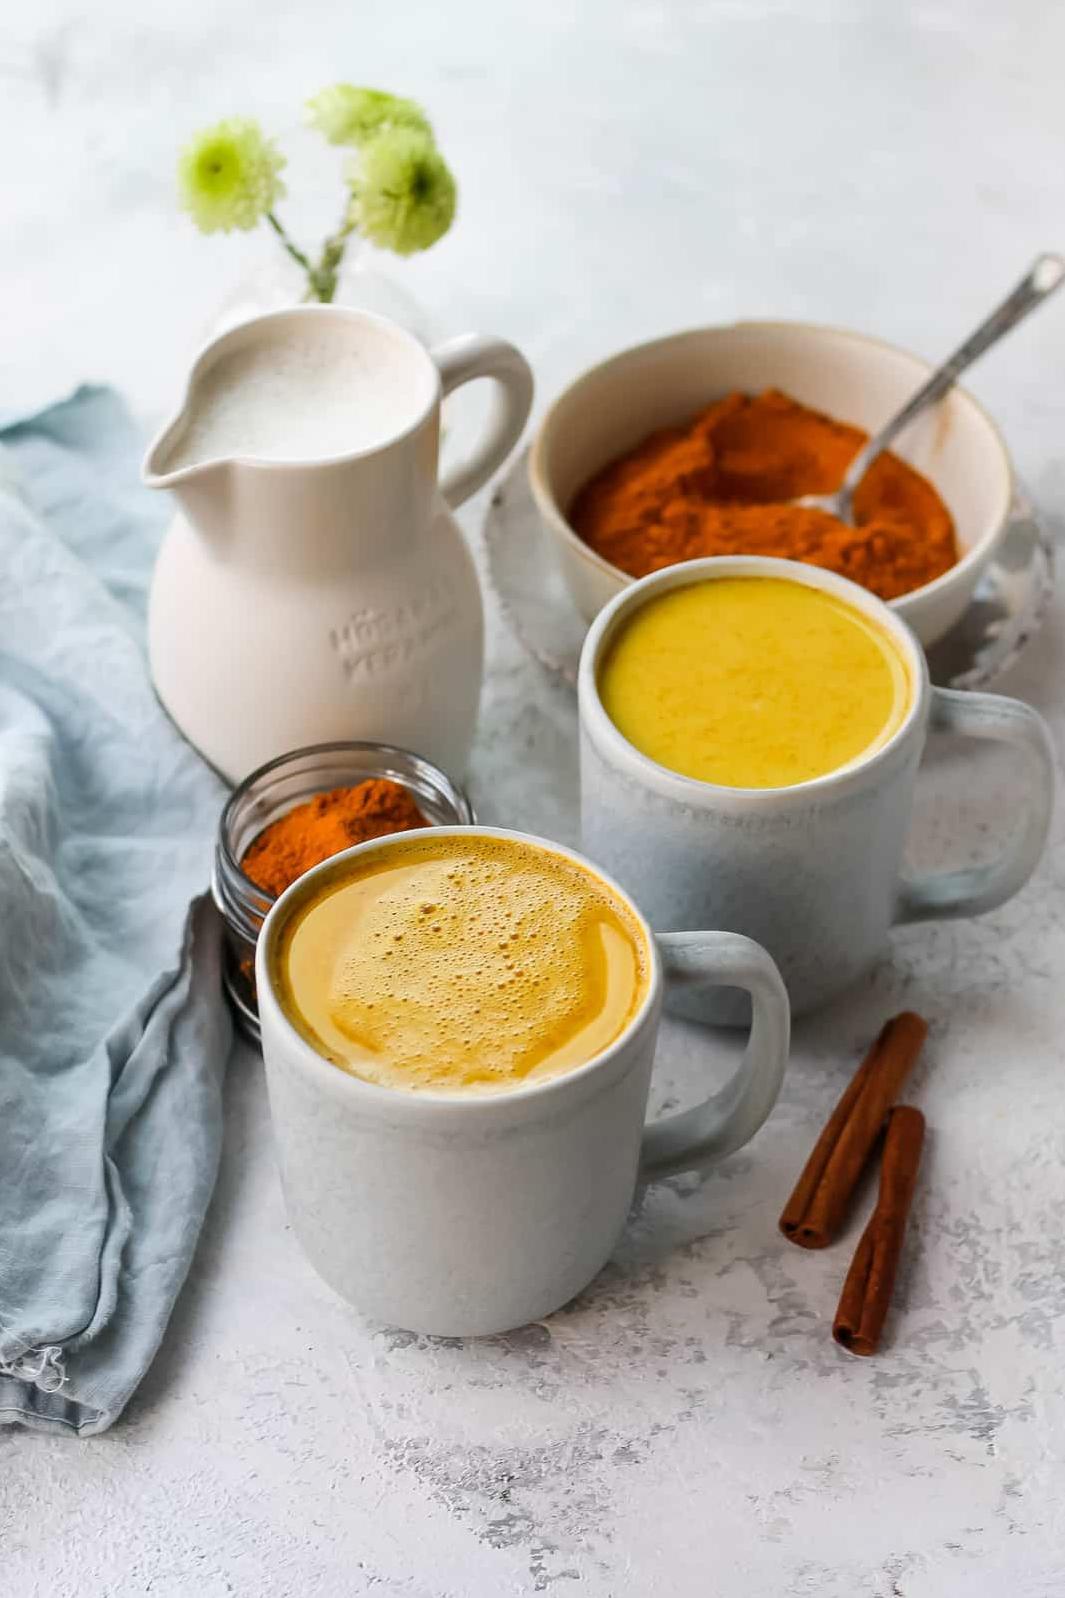  The perfect way to start your morning routine: a creamy turmeric latte ☕️💛